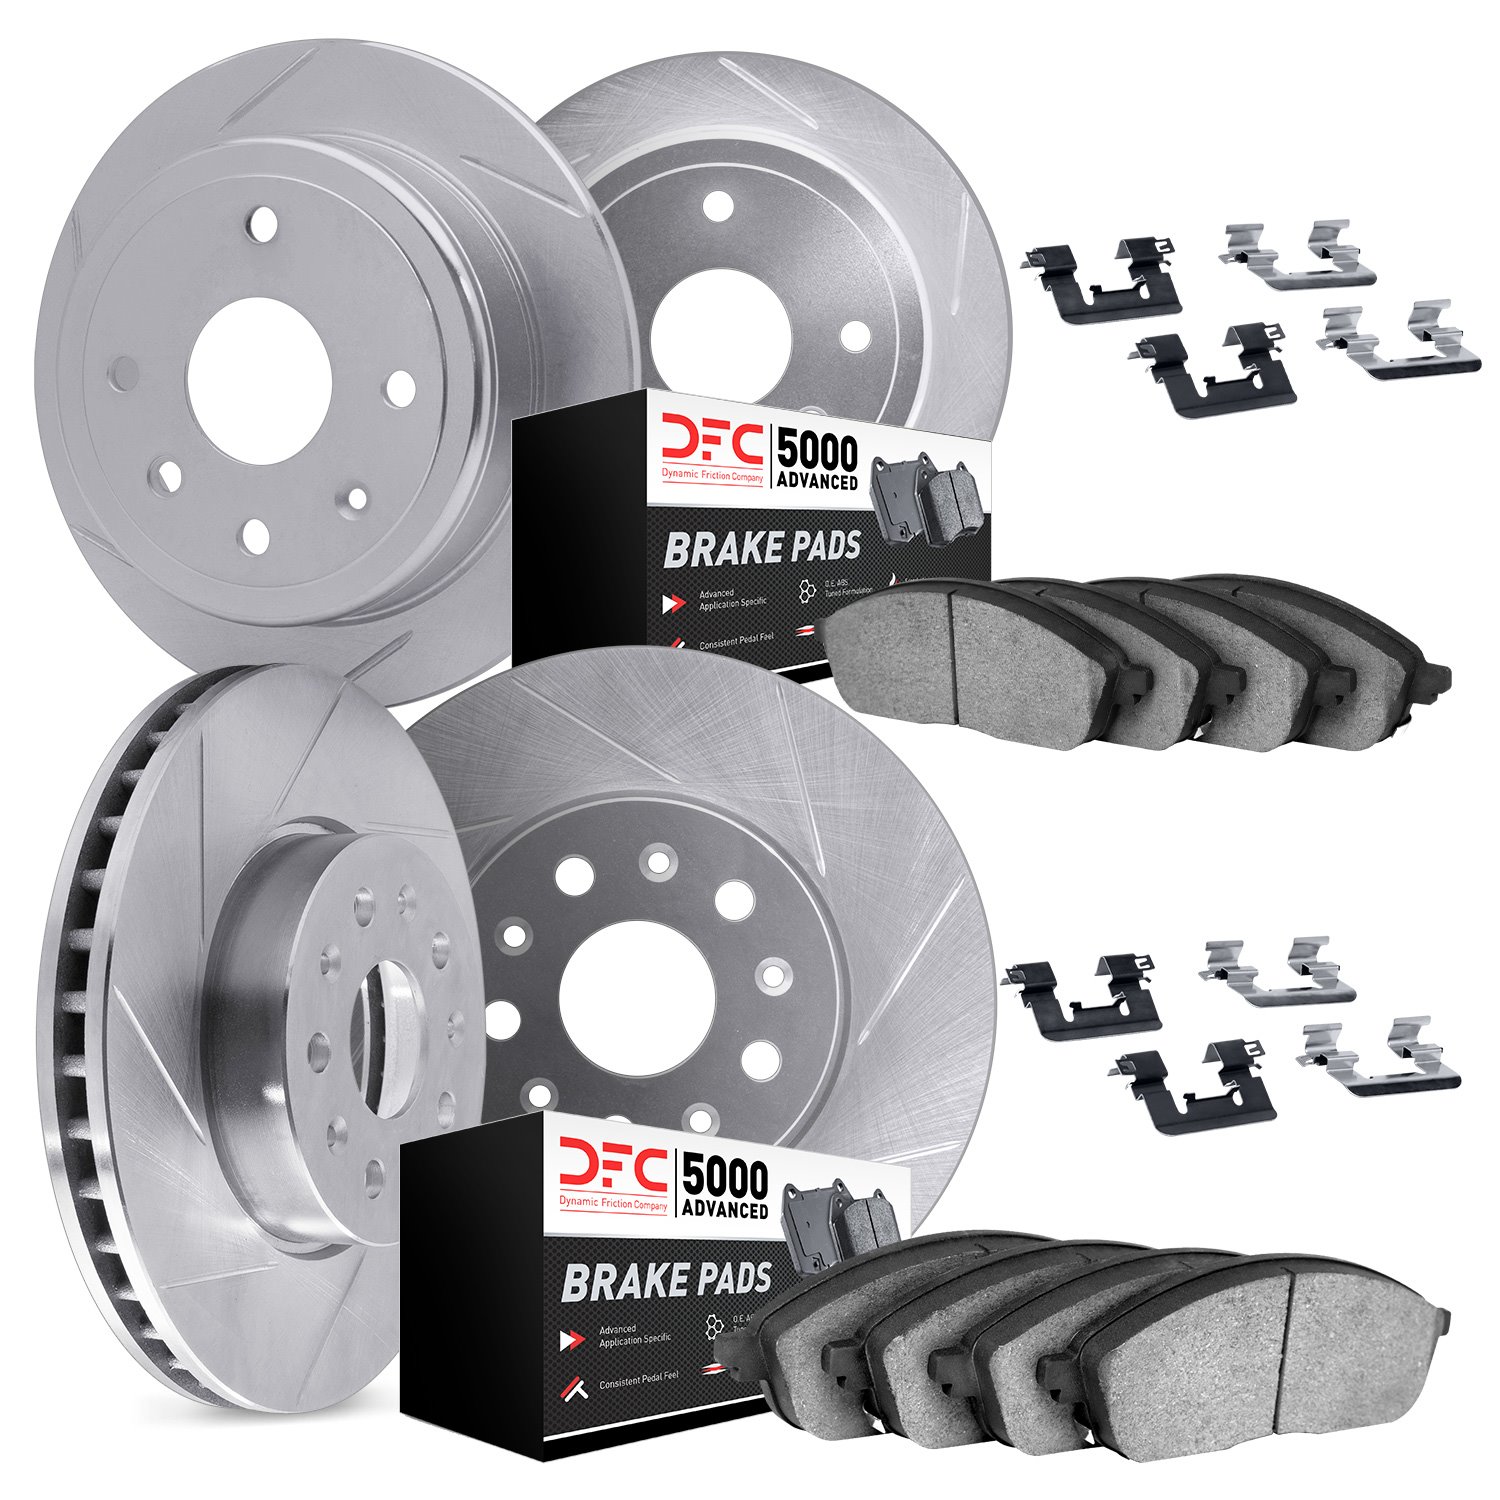 5514-59026 Slotted Brake Rotors w/5000 Advanced Brake Pads Kit & Hardware [Silver], 2003-2006 Acura/Honda, Position: Front and R